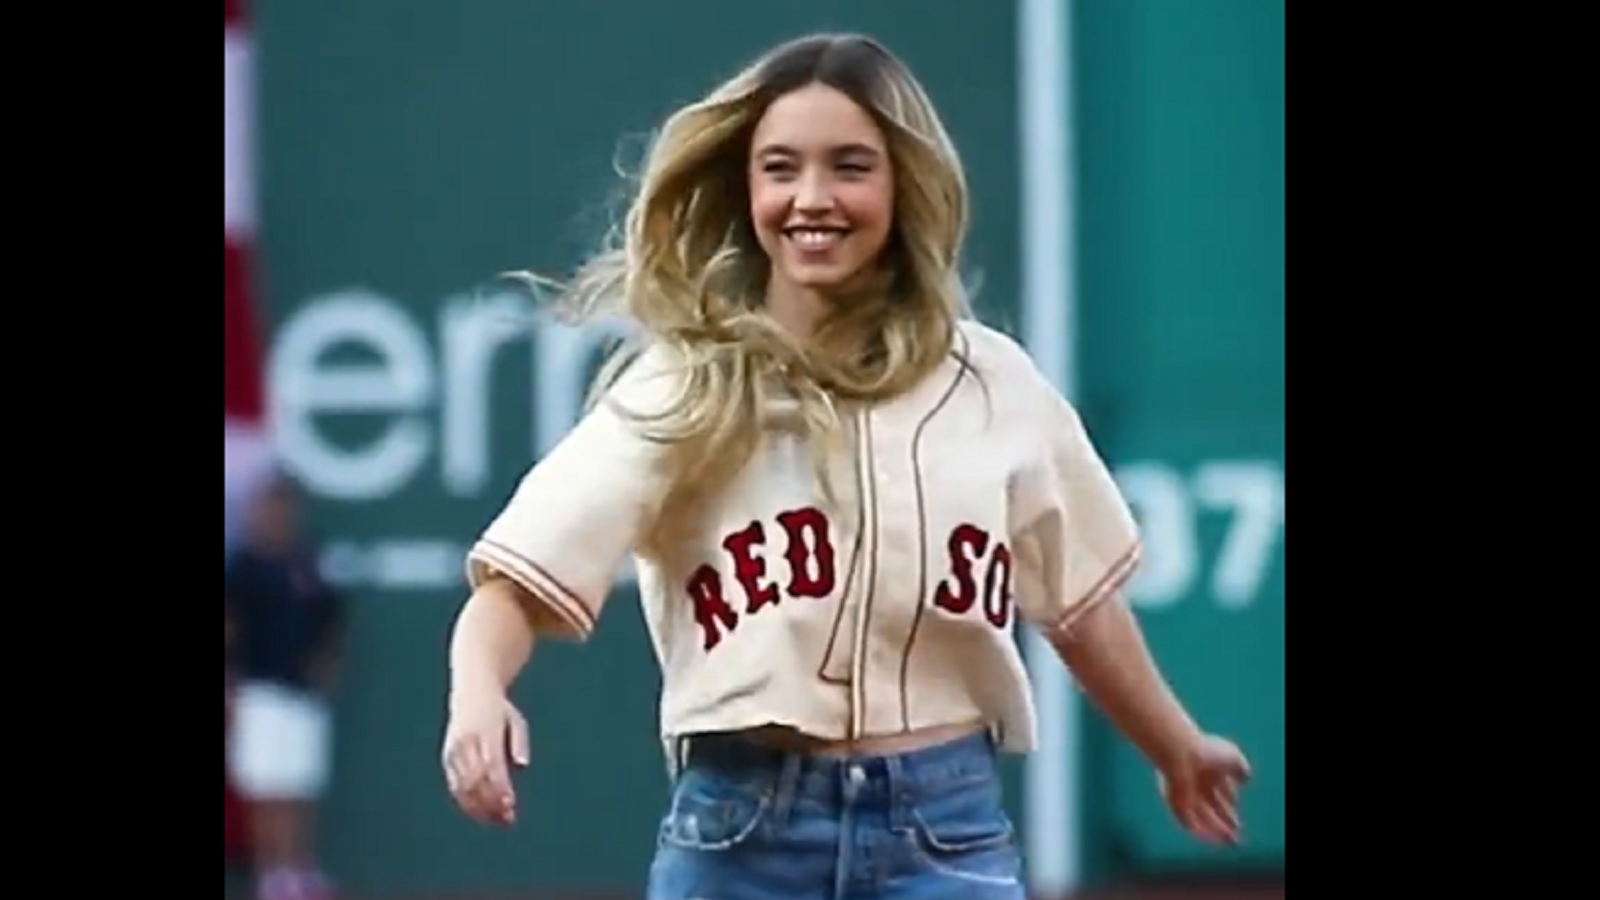 Sydney Sweeney trolls Red Sox after embarrassing 28-5 loss